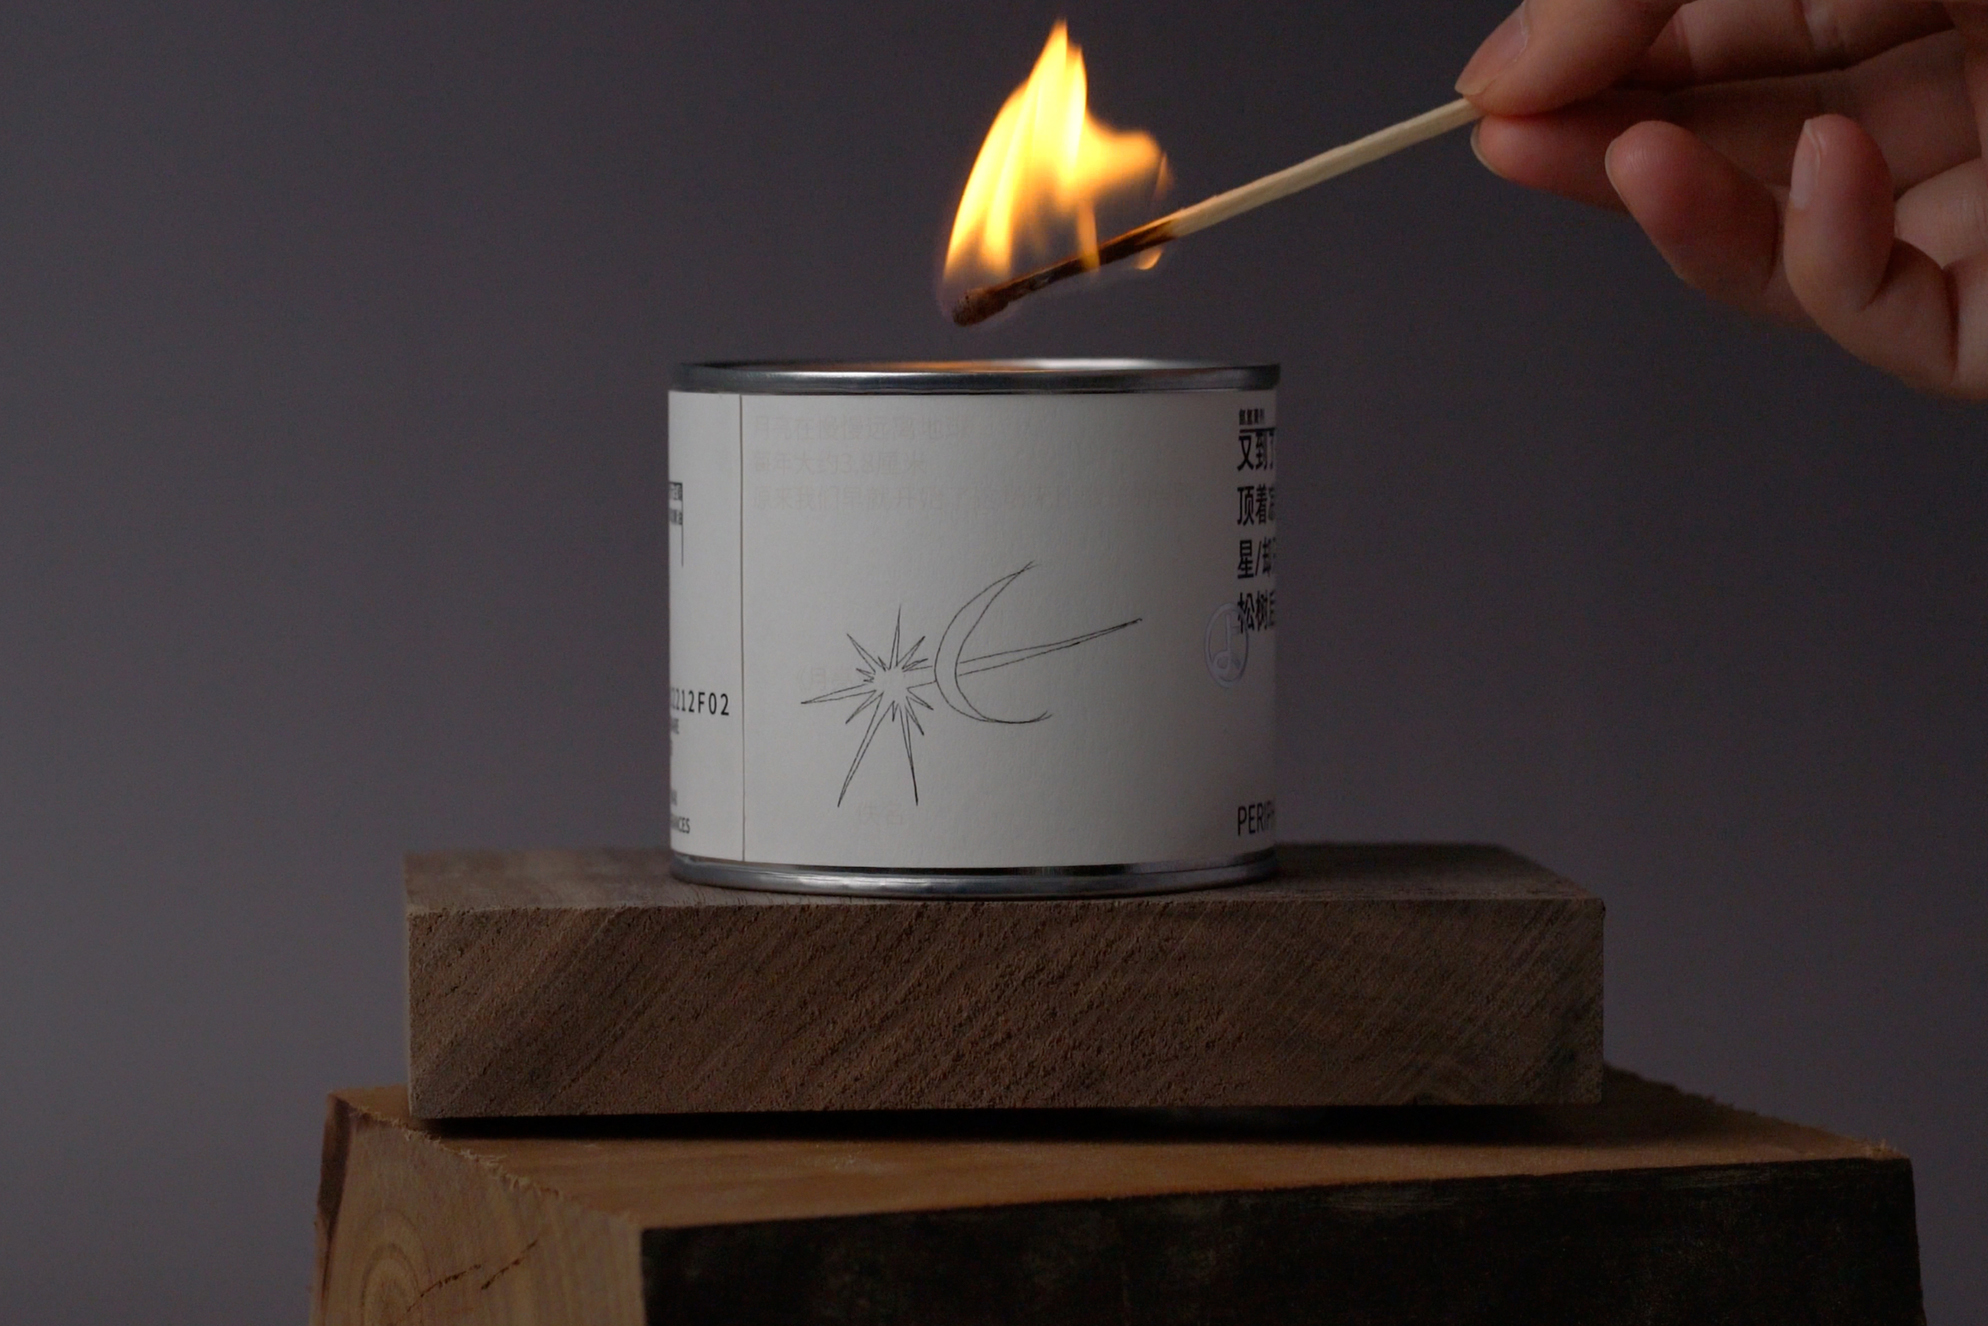 London Design Awards Winner - A few lines of verse and a can of burning solids